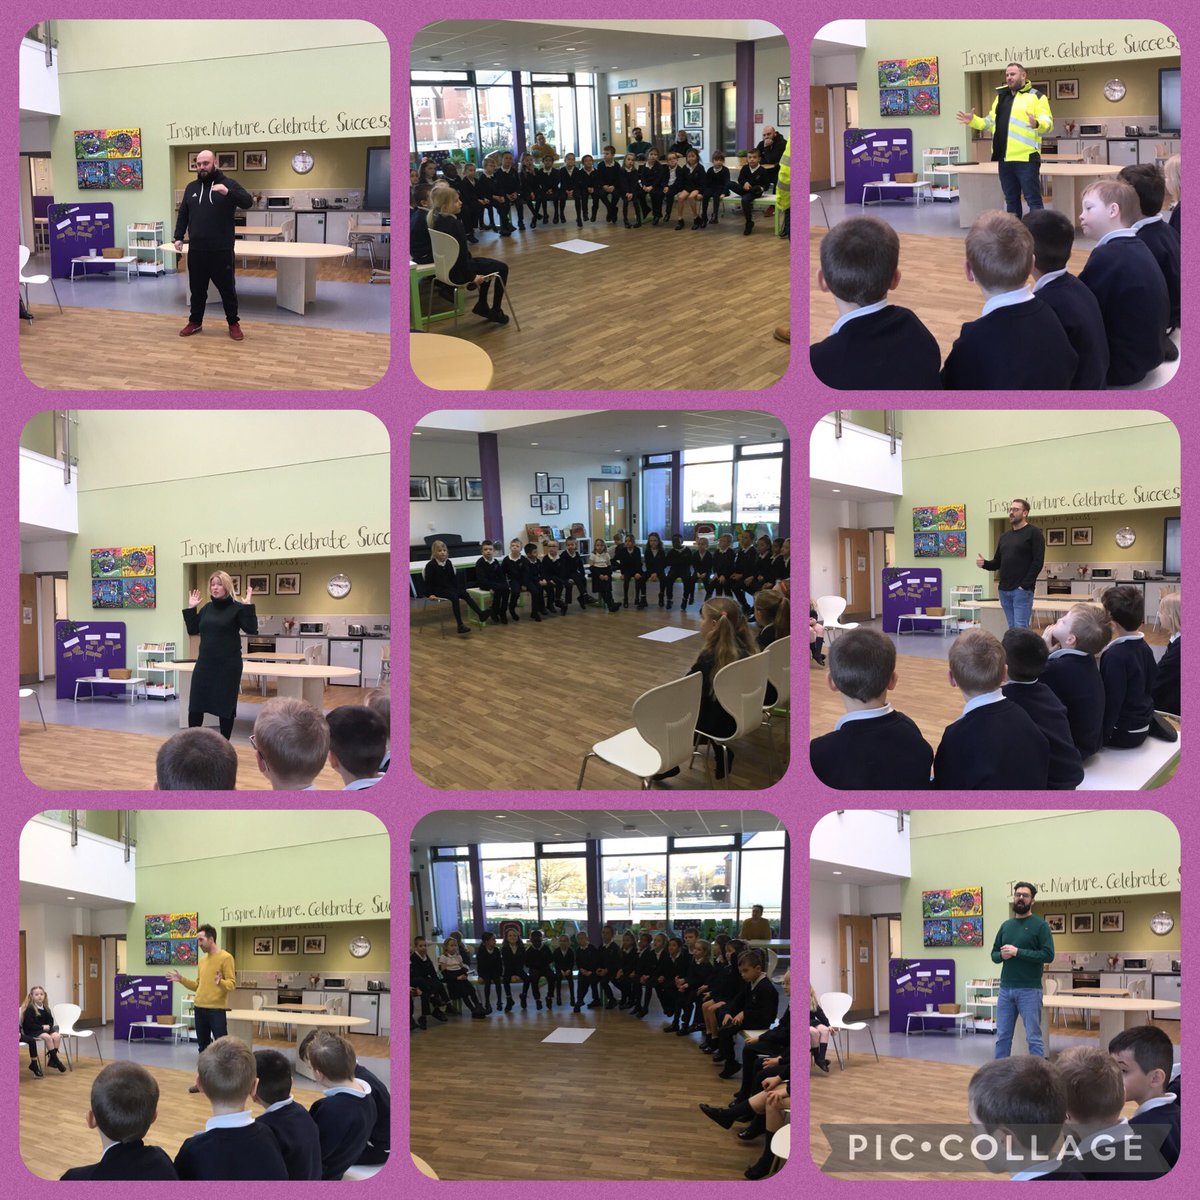 A huge thank you to our family members who came in this morning to tell us all about their jobs. It was really interesting to hear about the different jobs people have in our local community and the skills needed to do these different jobs. #JPPSThrive #JPPSInspire #community